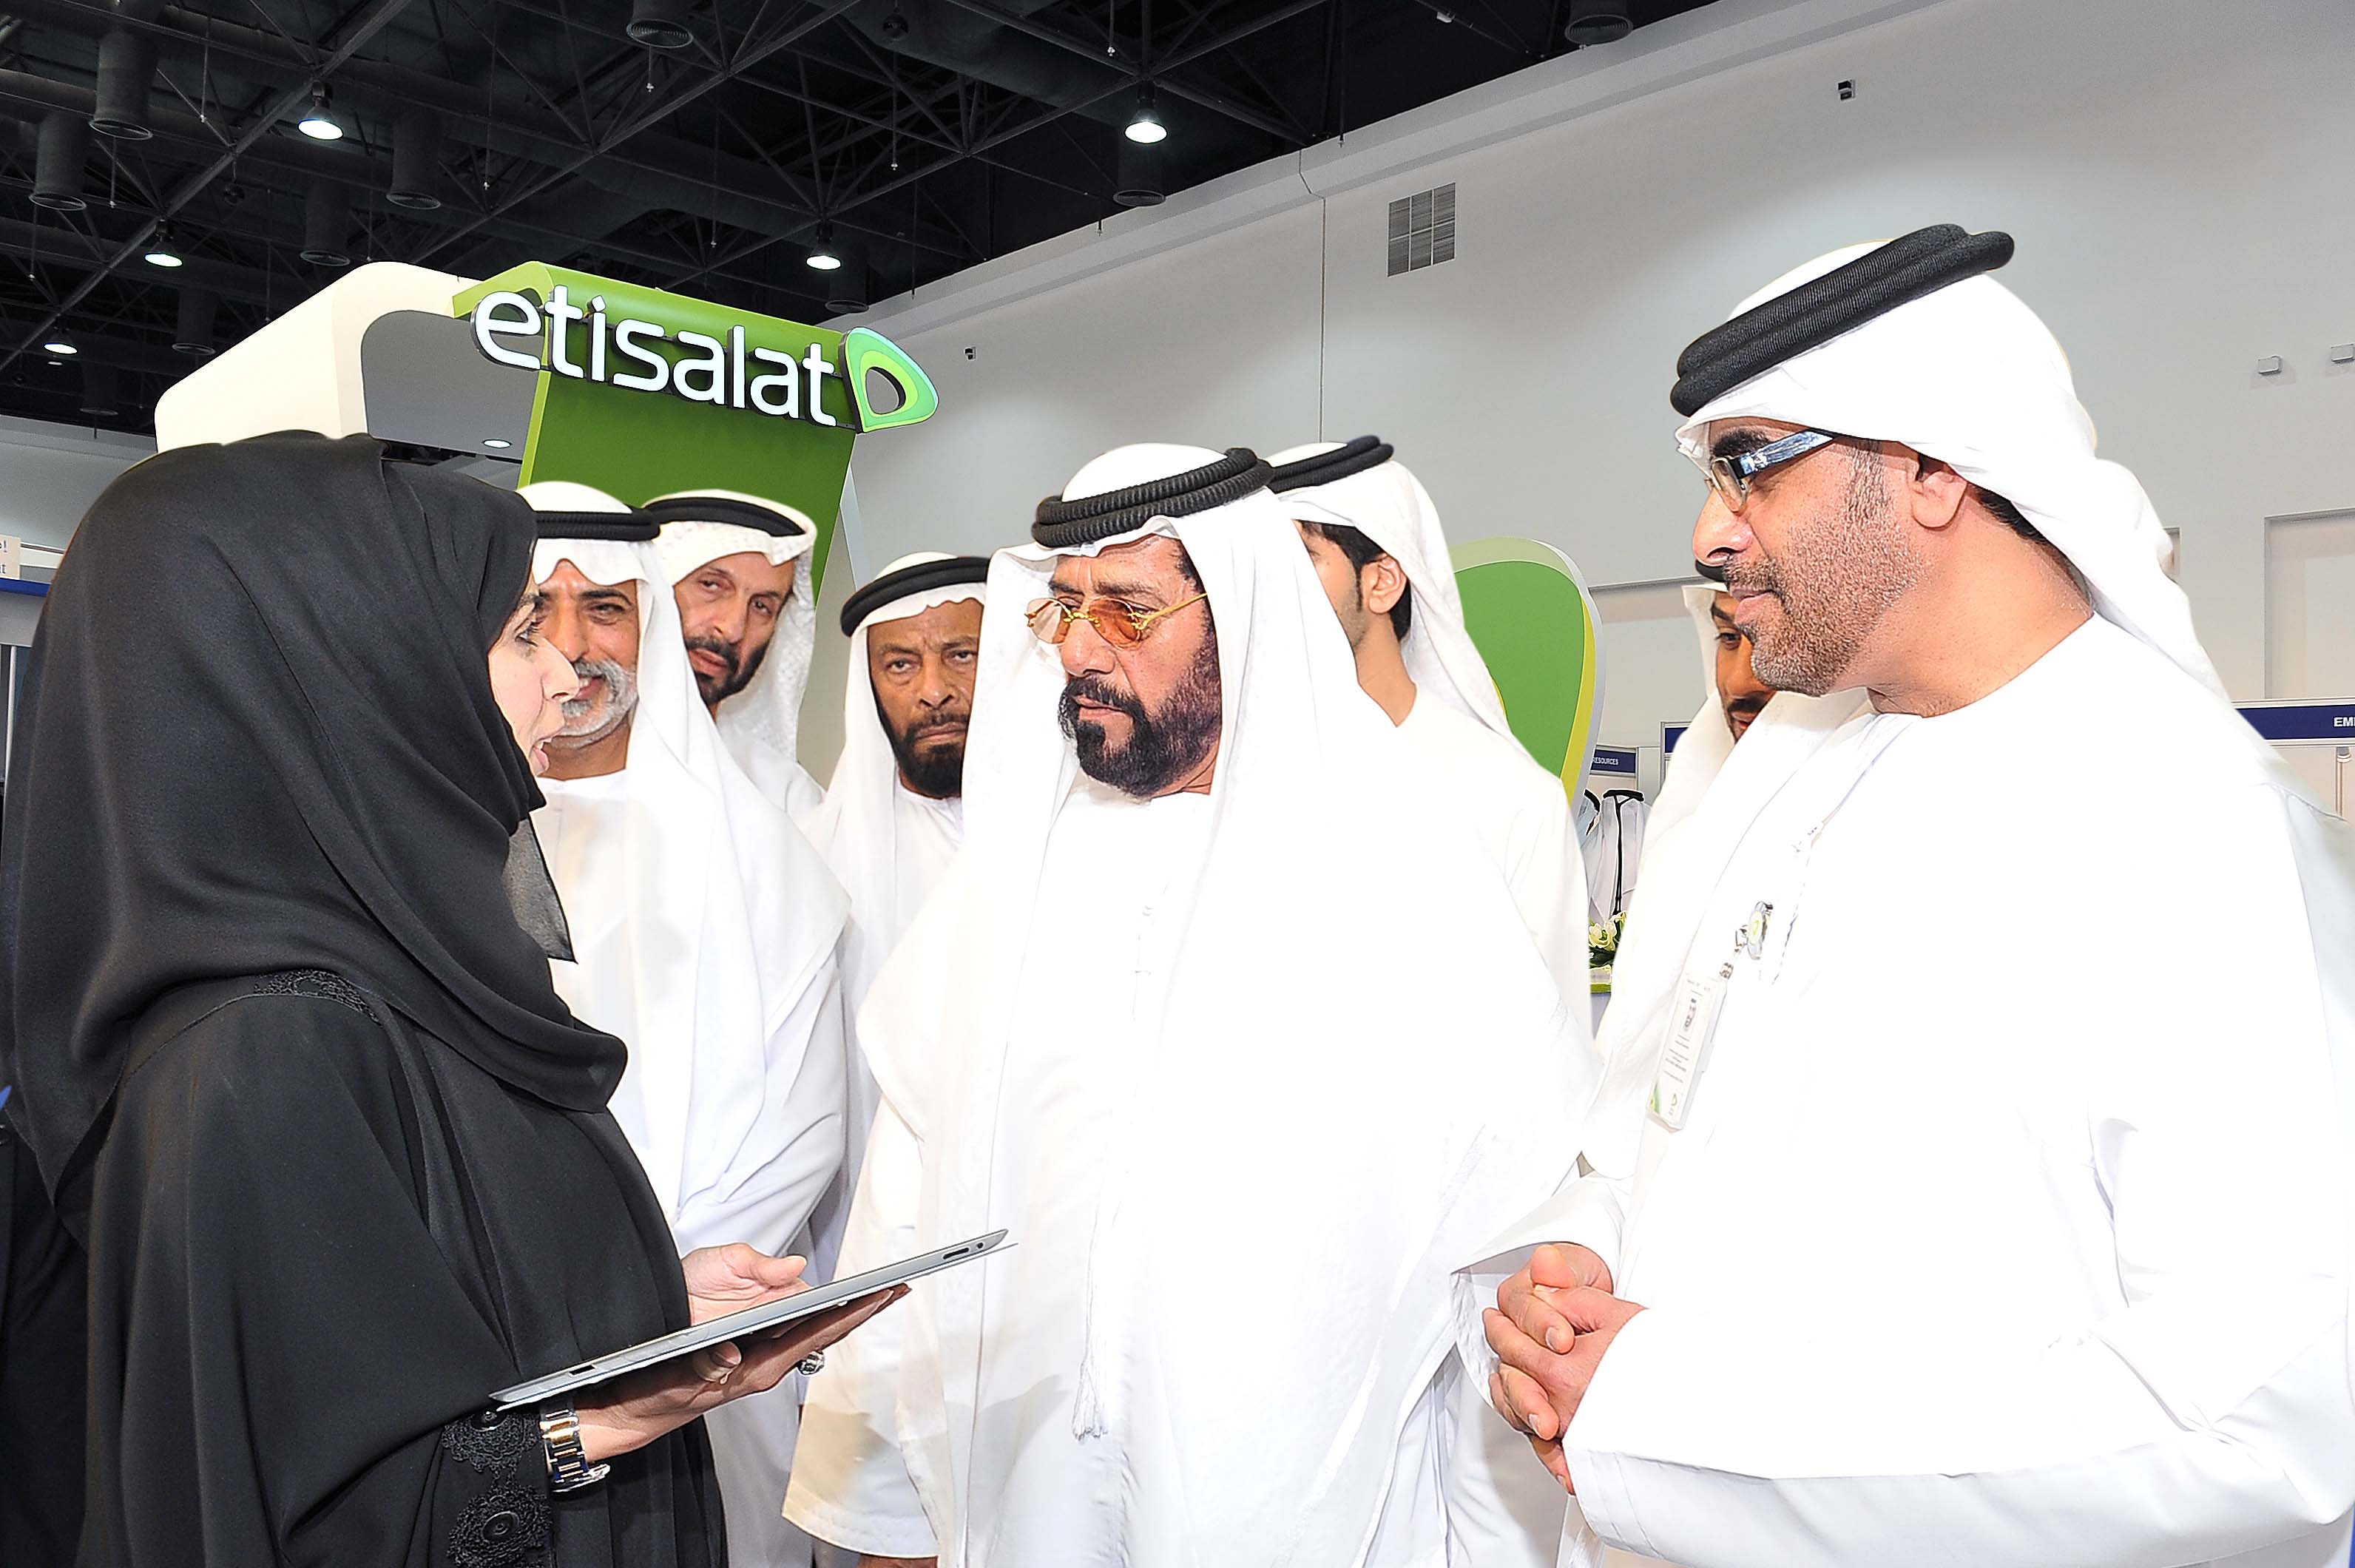  - His-Highness-Sheikh-Tahnoon-Bin-Mohammad-Al-Nahyan-H-H-Sheikh-Nahyan-bin-Mubarak-Al-Nahyan-and-Nasser-Bin-Obood-A-CEO-Etisalat-during-the-exhibition